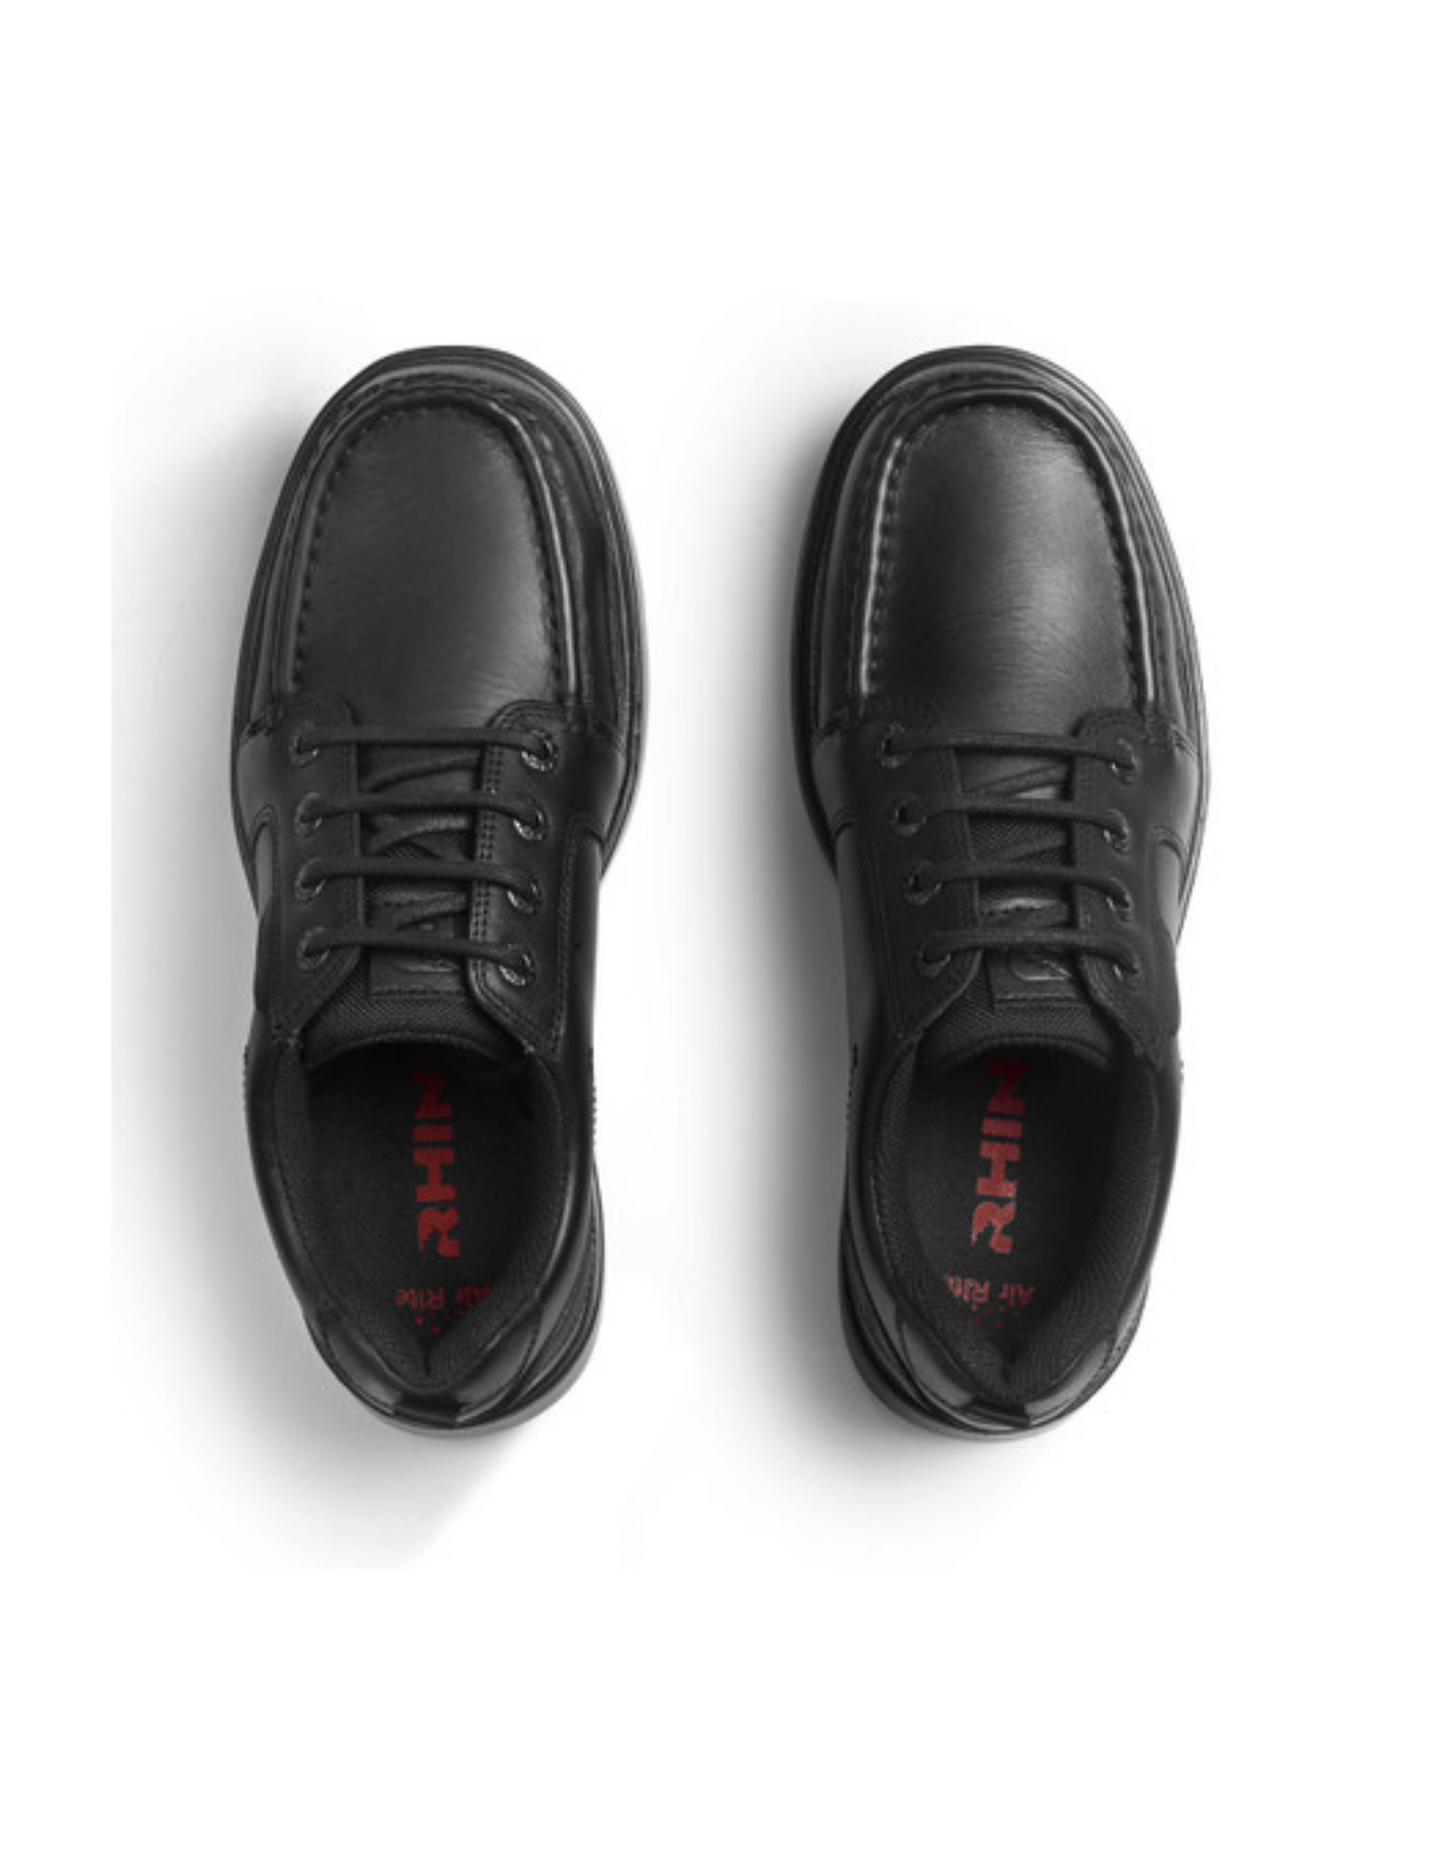 Startrite Cadet Black leather boys lace-up school shoes